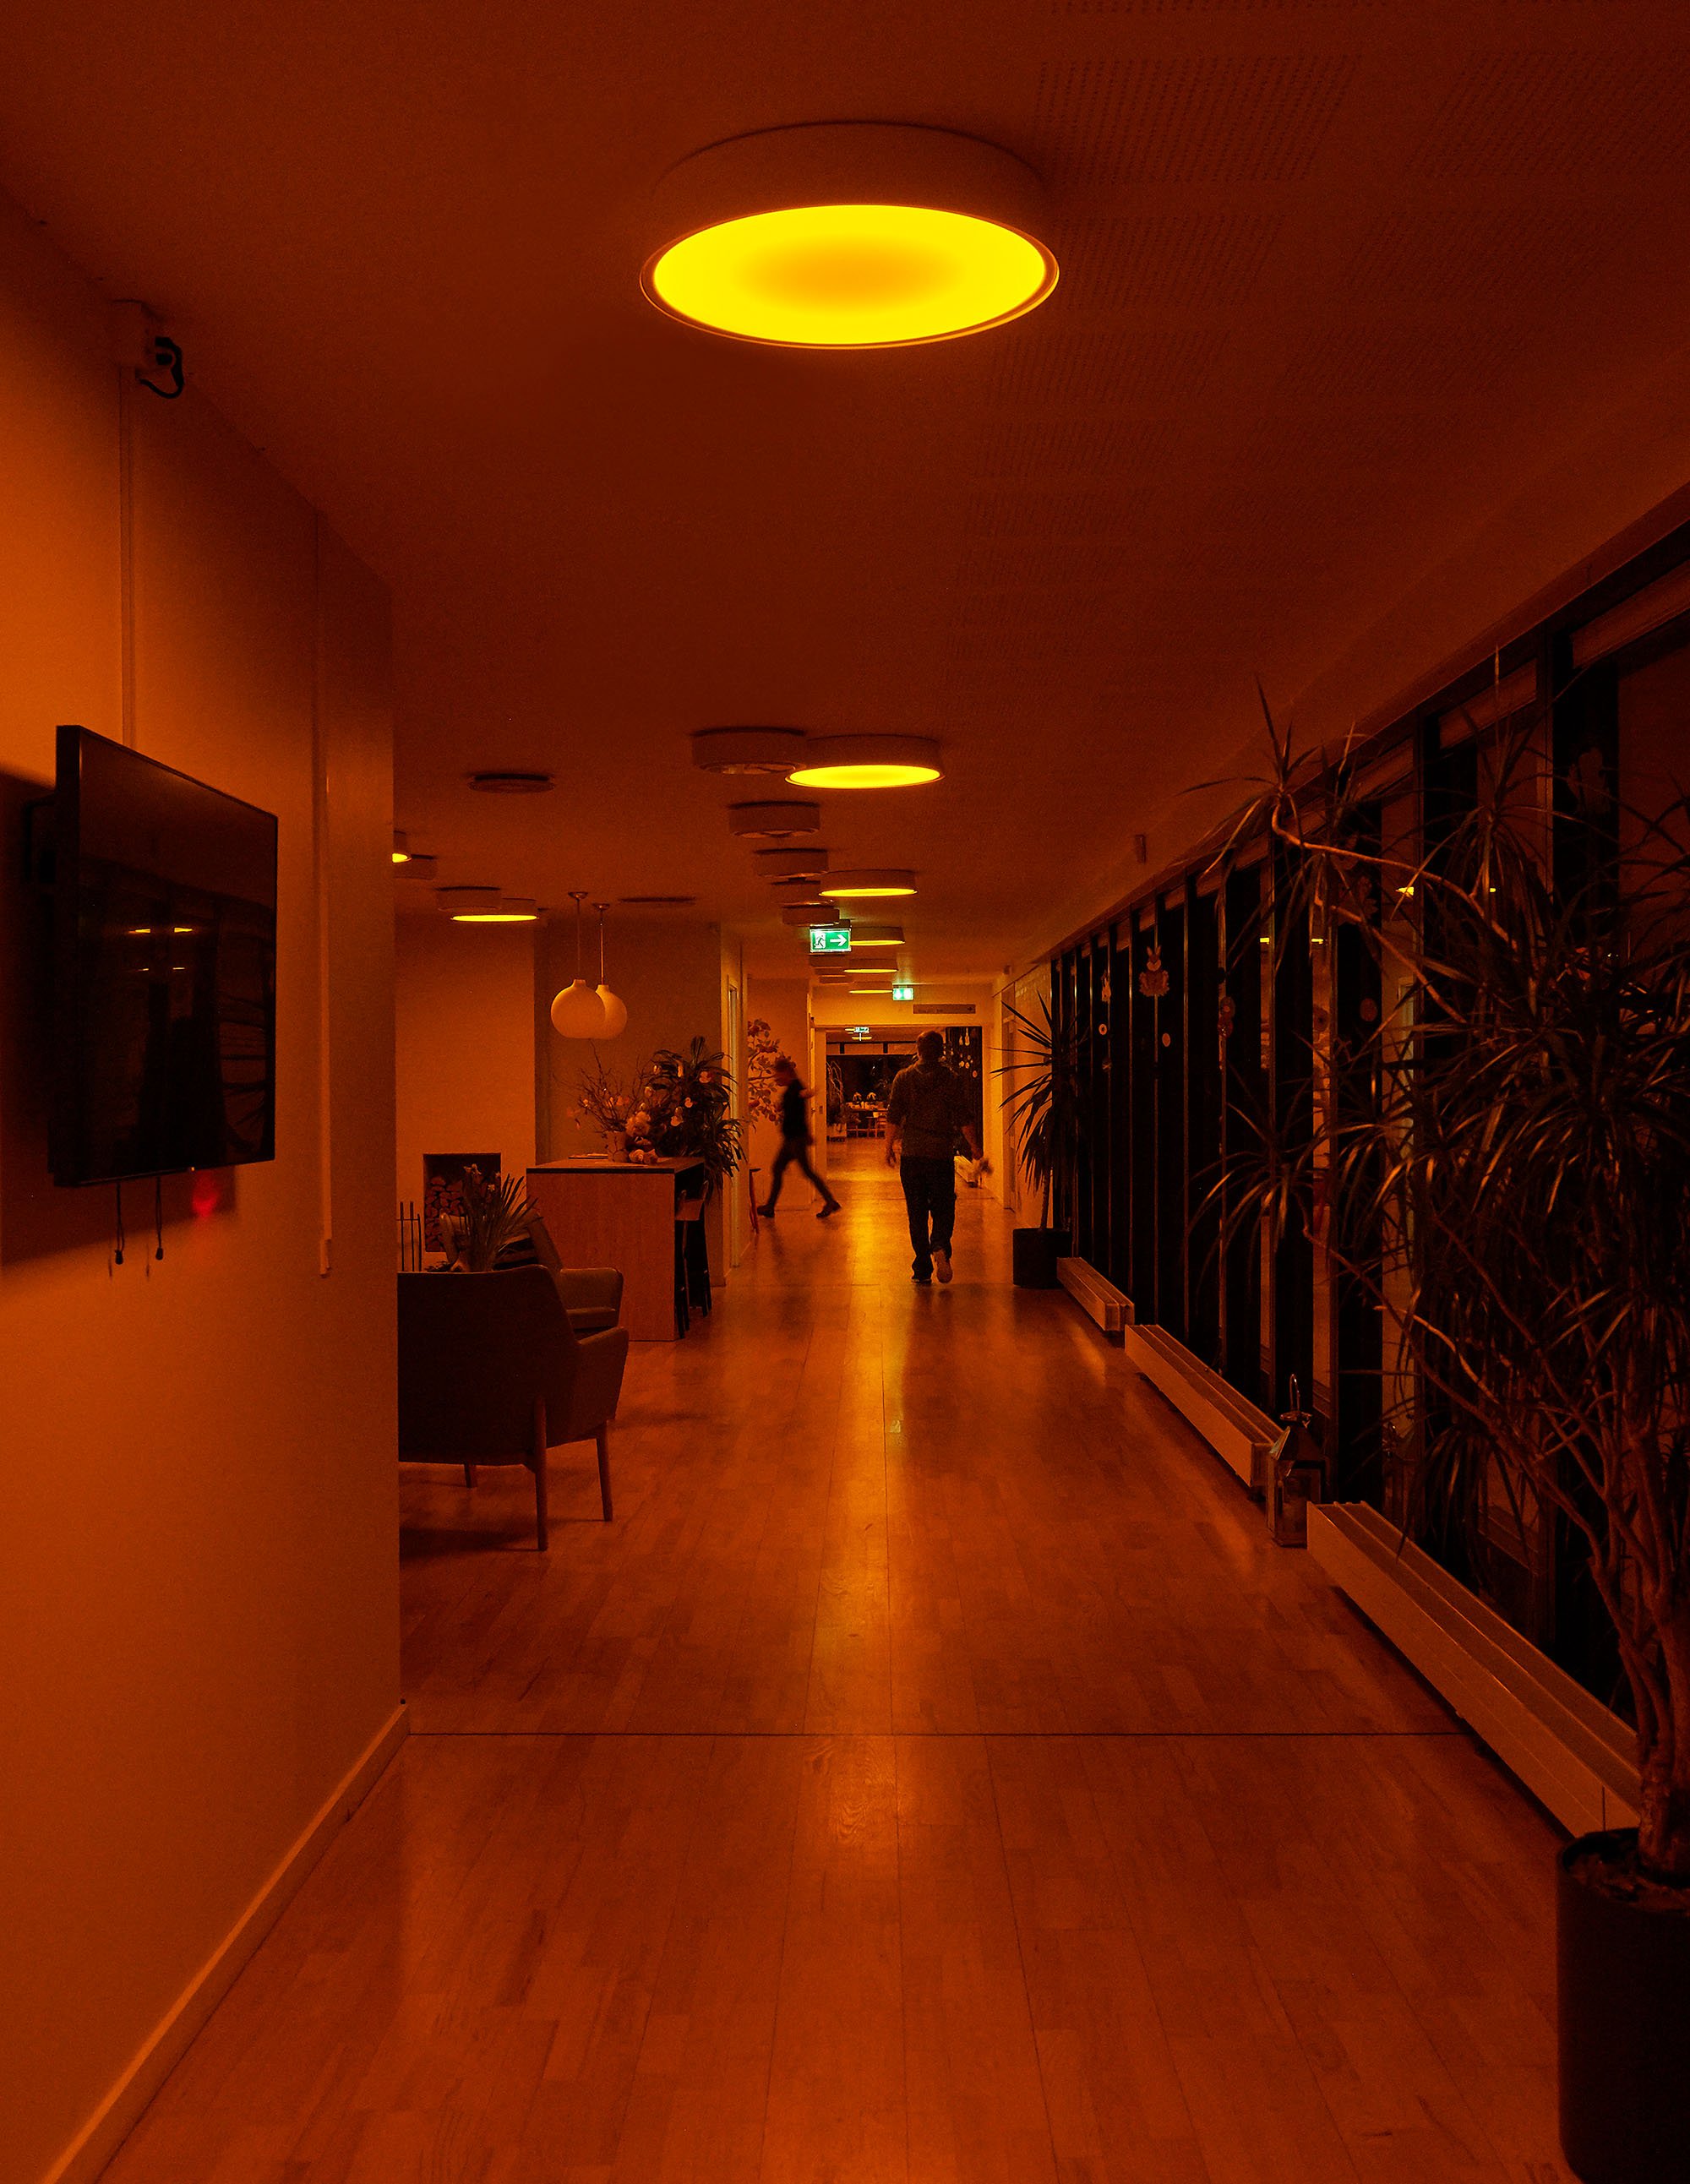 Staff walking in the hallways of a nursing homw with circadian lighting in the ceiling